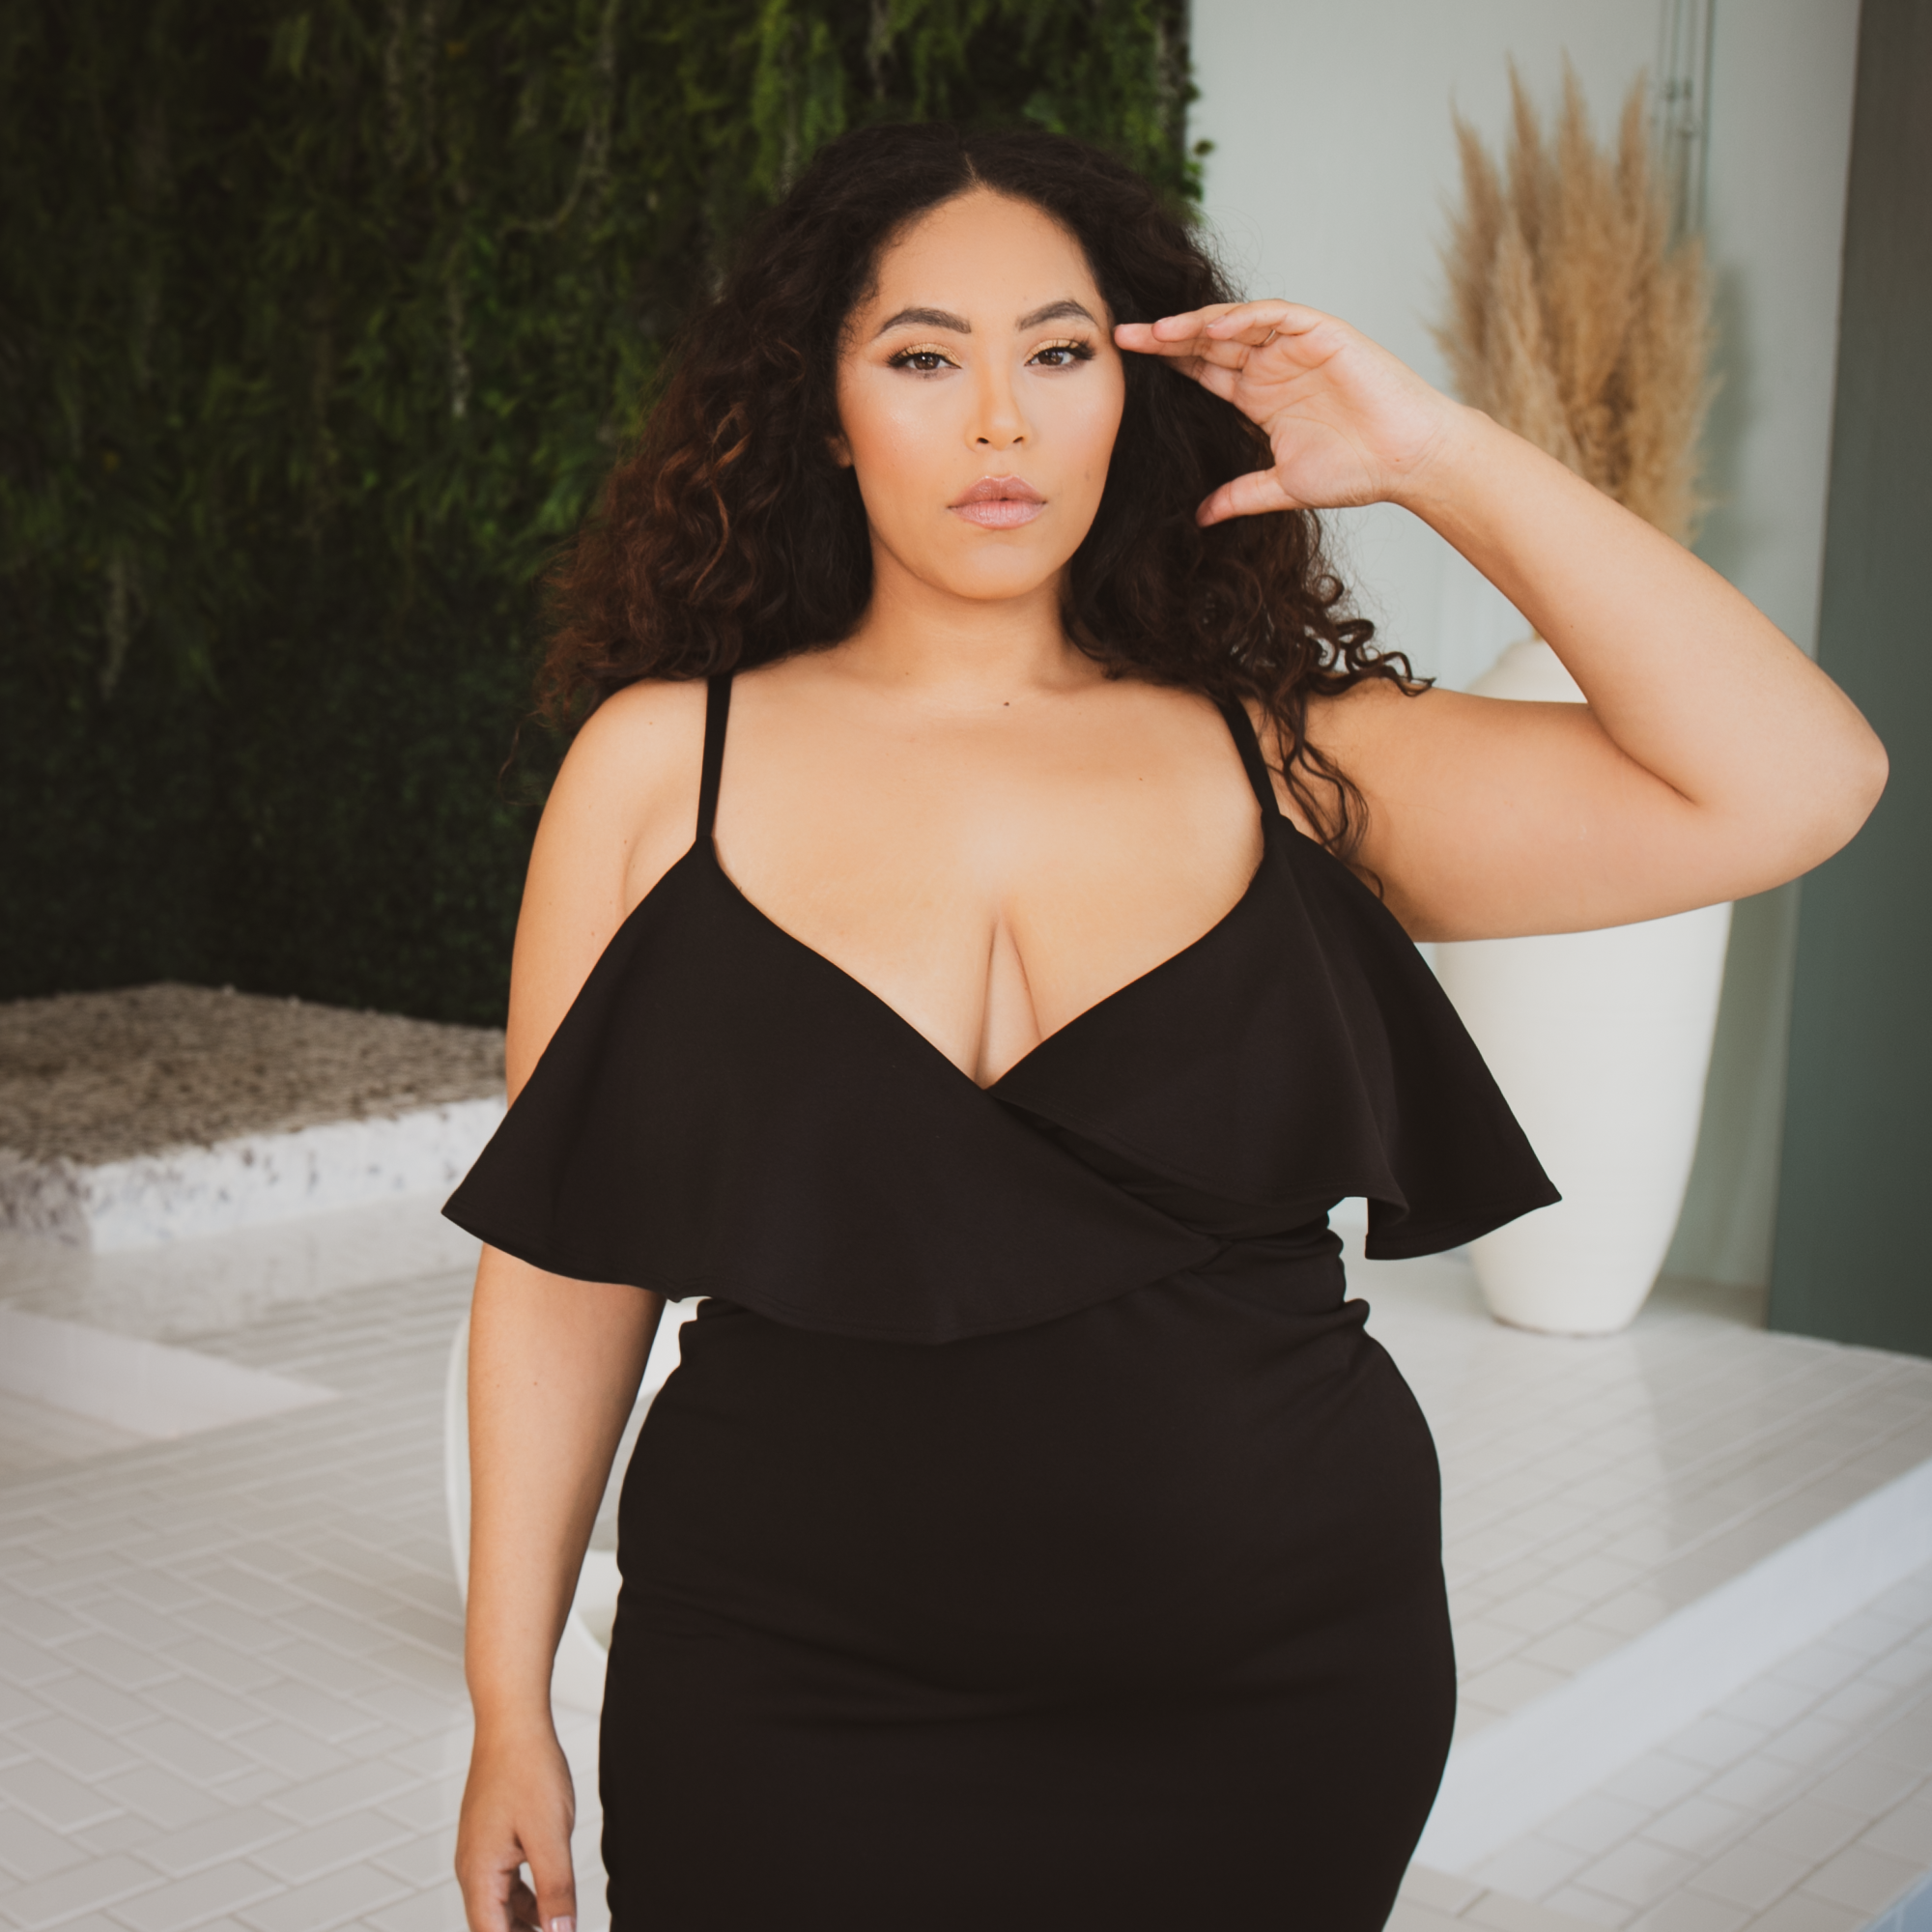 Curvy Sense - Standing Fiercely @lovetiffanyjanise . ✨✨✨✨✨ Tap to shop and  get 40% off 🛍. Use code BF40 and don't miss out on our Black Friday sale # curvysense #curvysensedoll #plussizefashion #curvygirl #